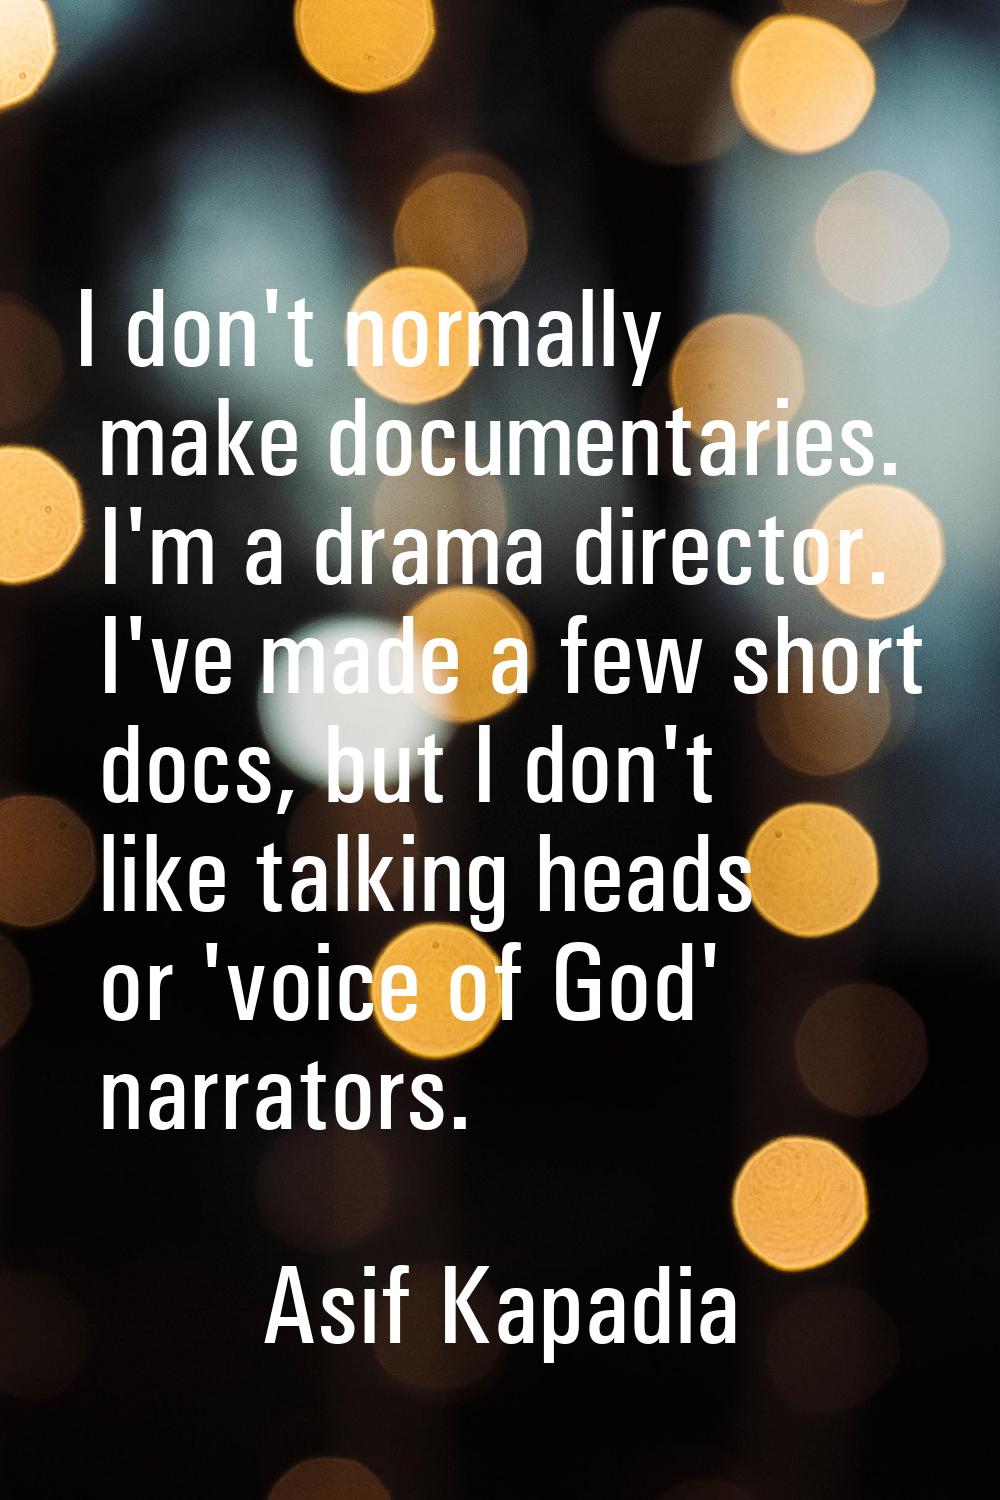 I don't normally make documentaries. I'm a drama director. I've made a few short docs, but I don't 